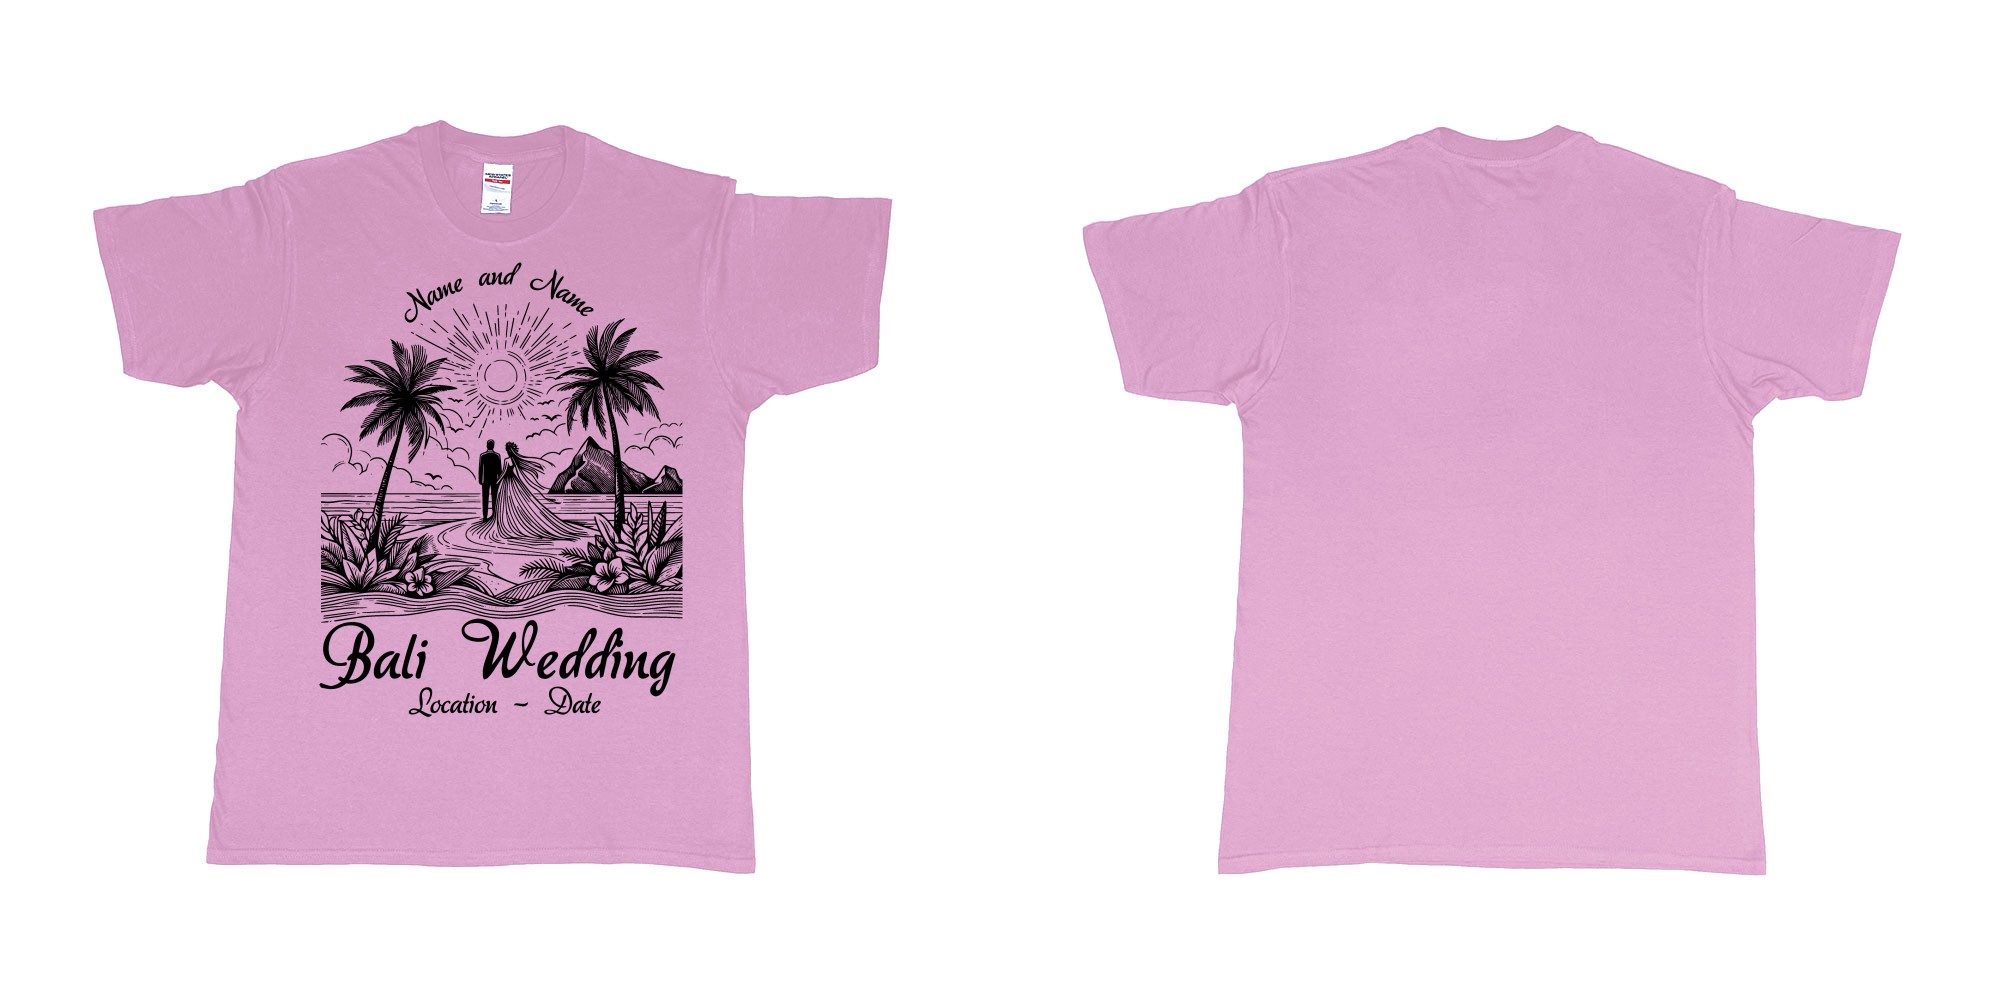 Custom tshirt design bali wedding drawing couple beach sunset palmtrees in fabric color light-pink choice your own text made in Bali by The Pirate Way